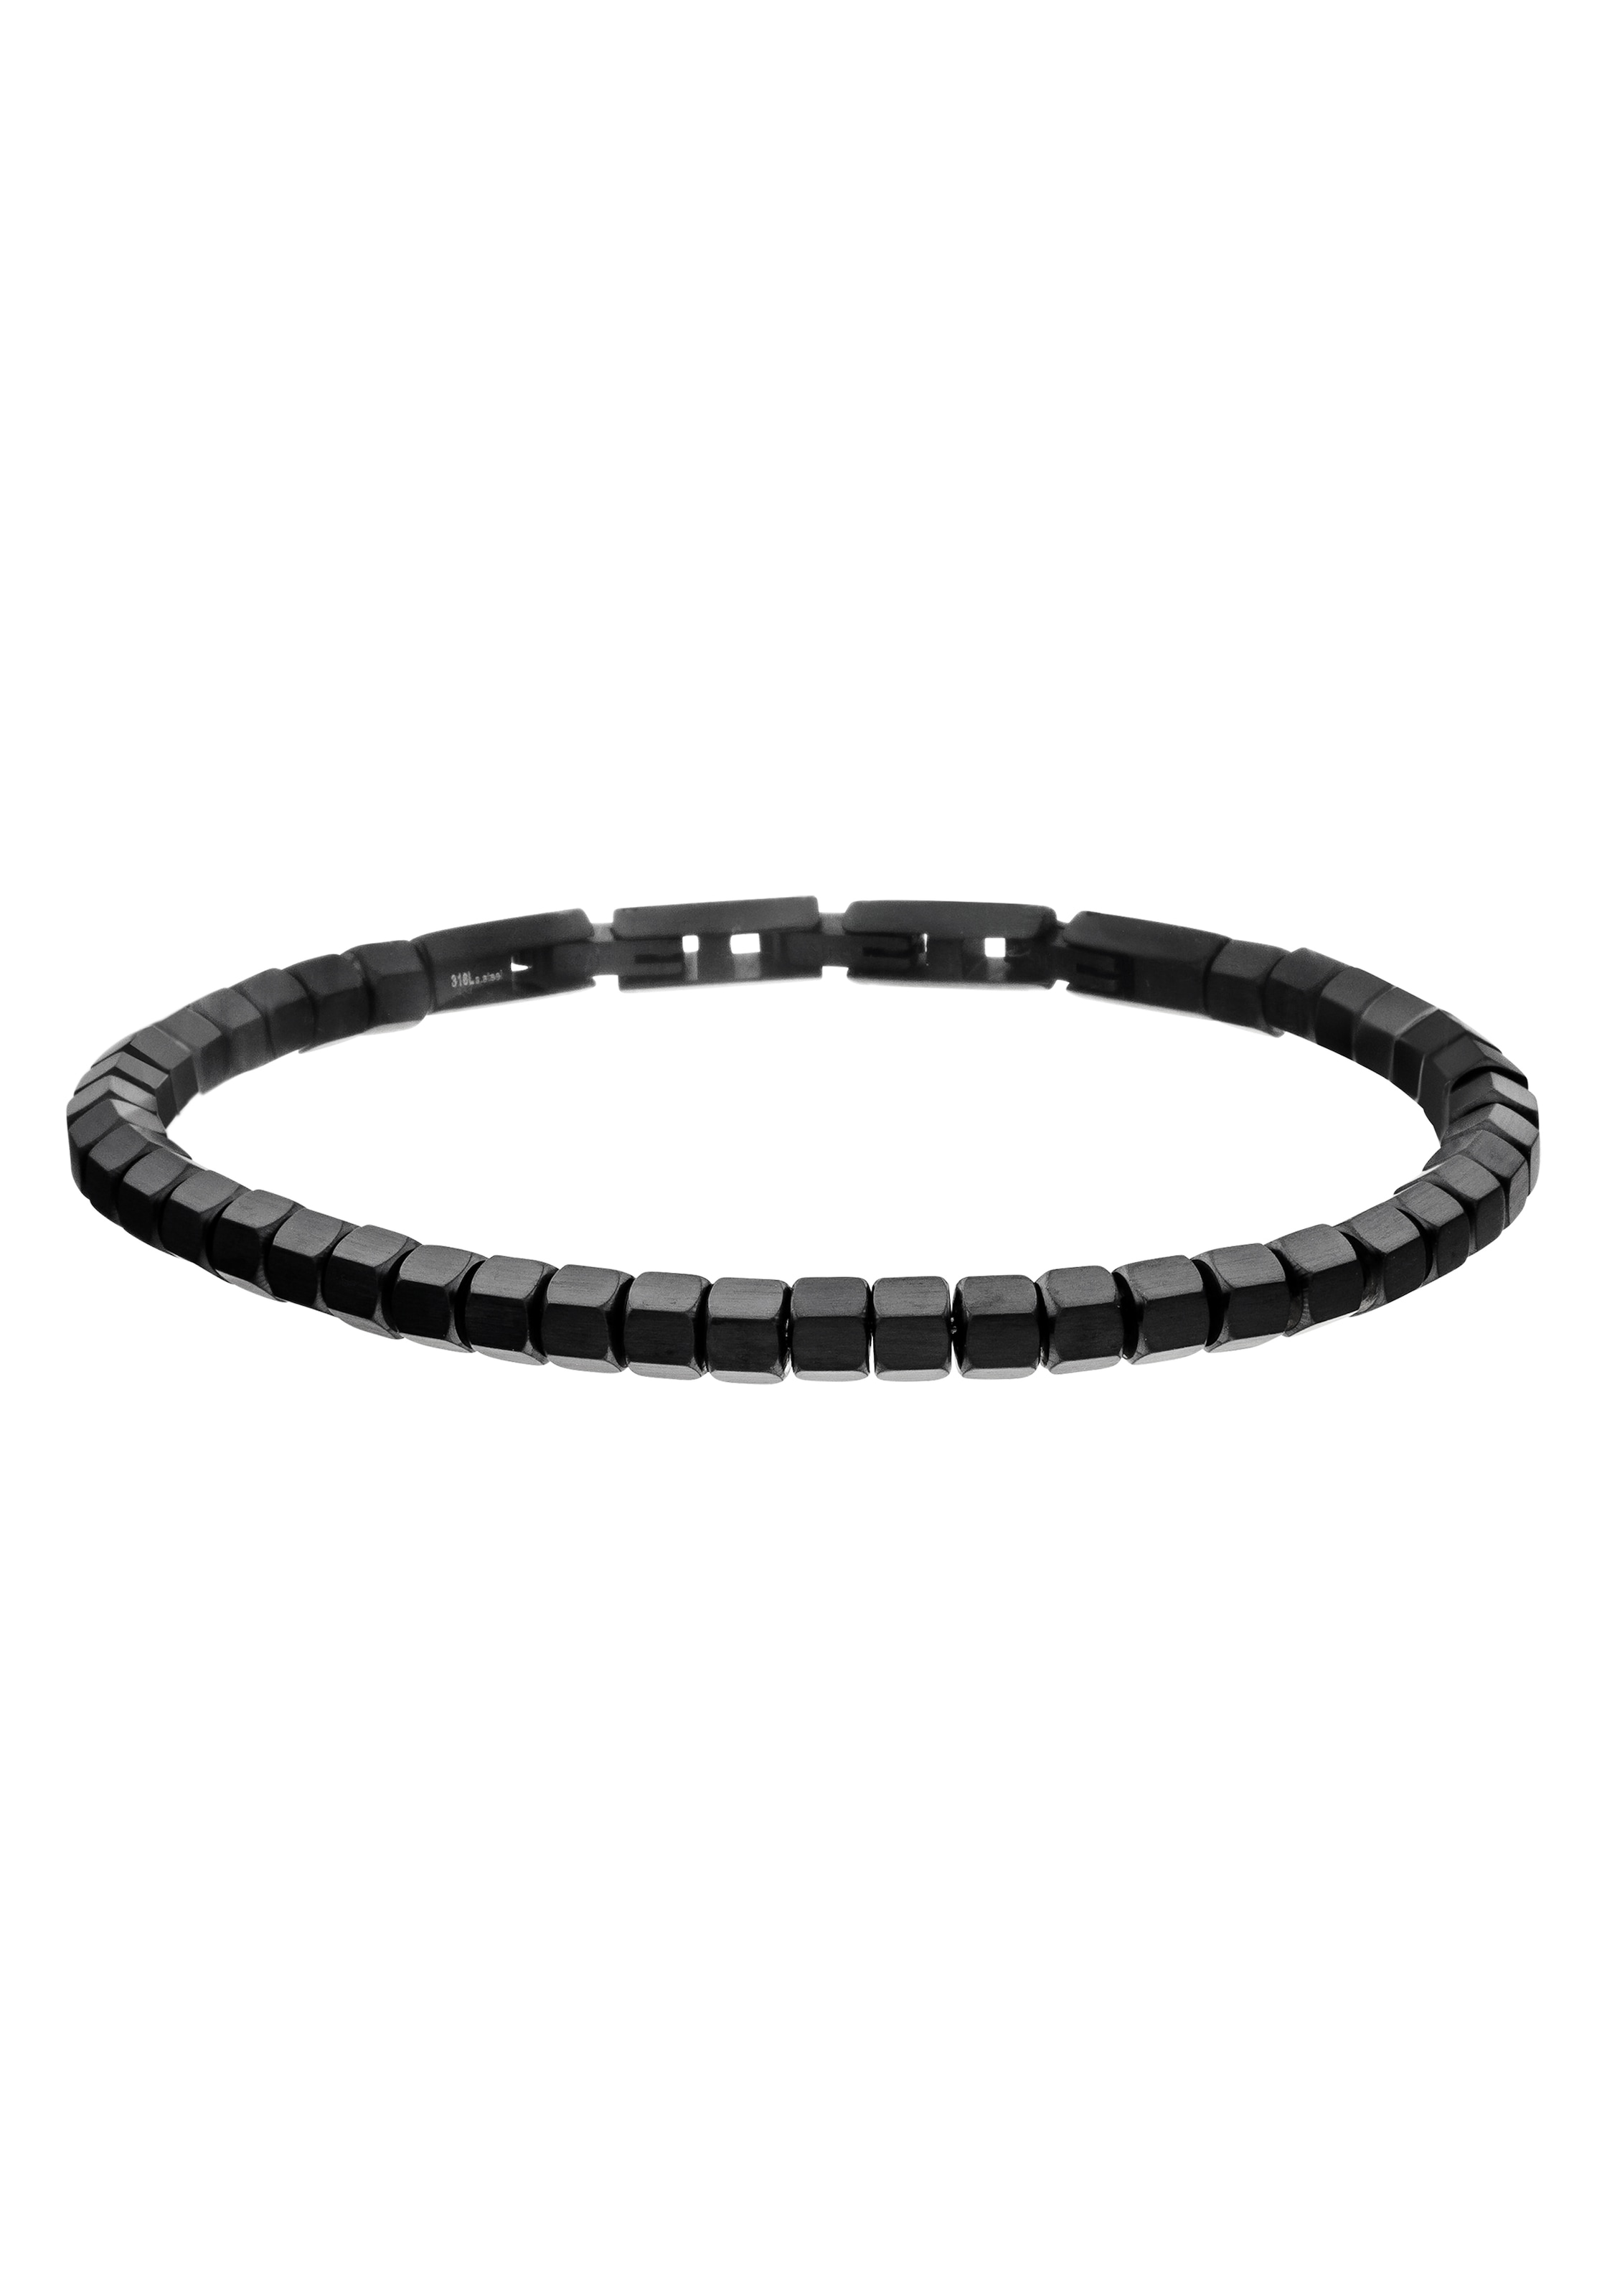 STEELWEAR Armband shoppen bei Aires, SW-686, online »Buenos SW-687« OTTO